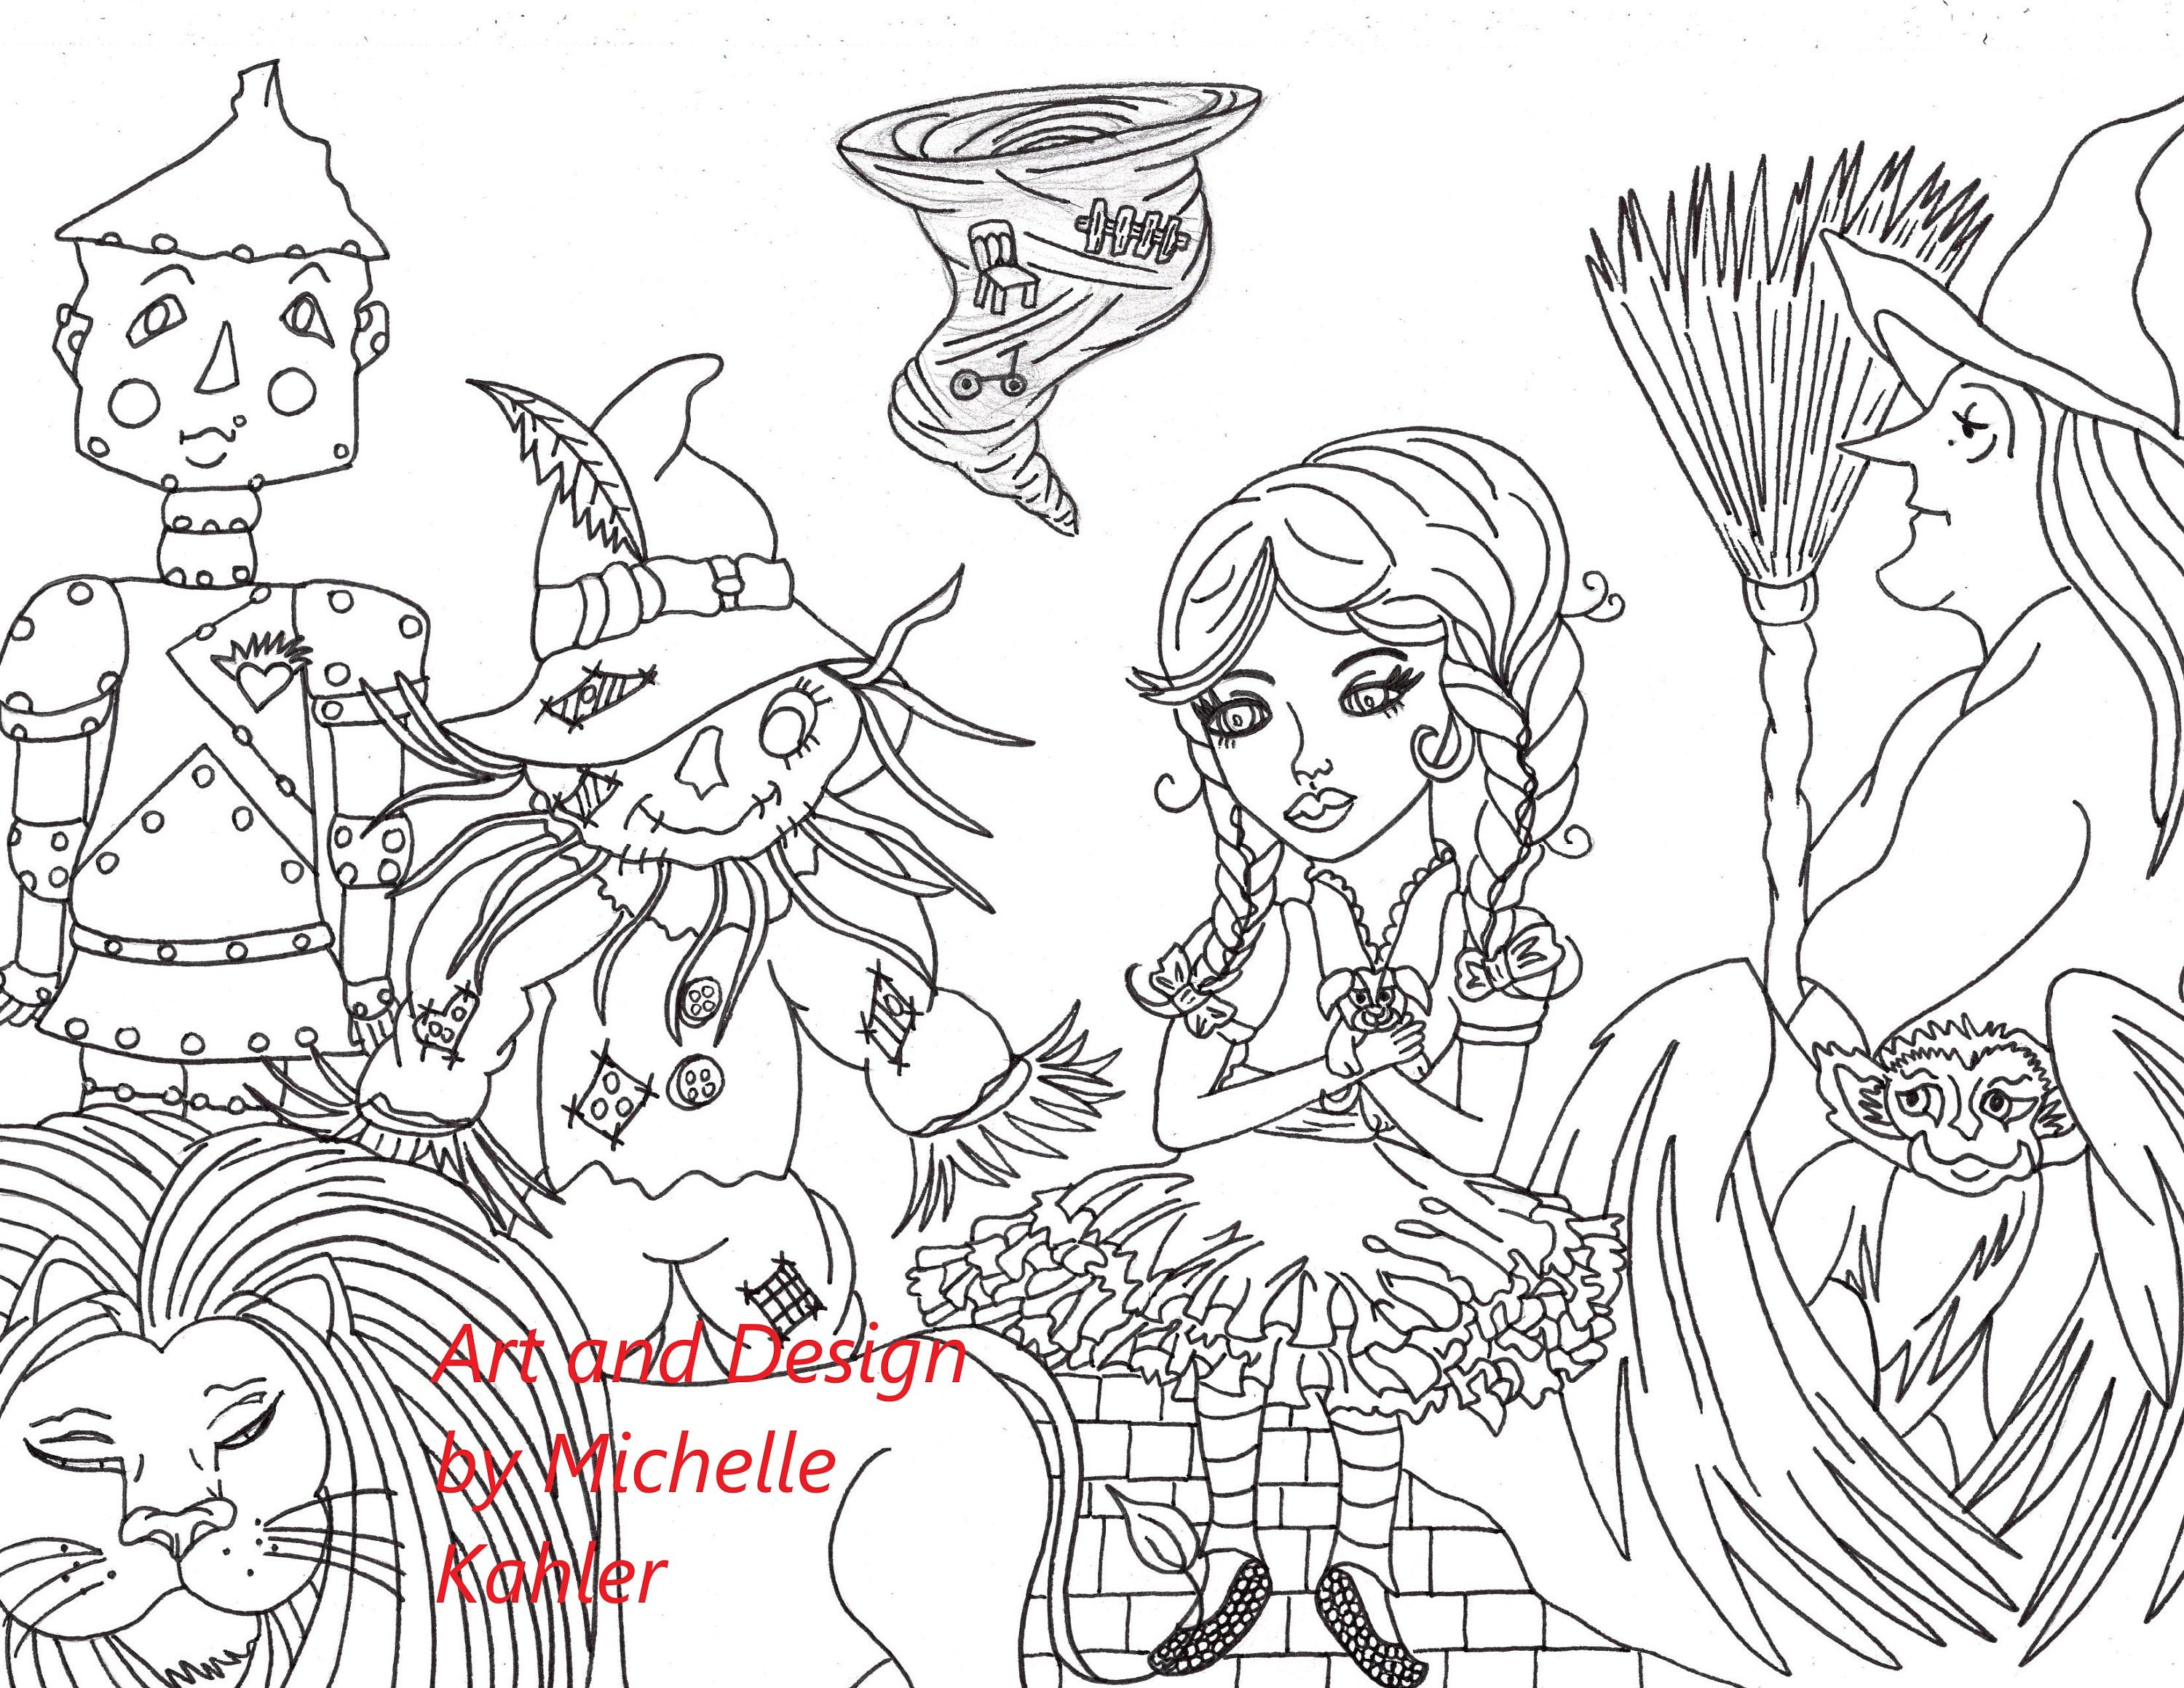 Wizard Of Oz Printable Coloring Pages 4 Printable Coloring Pages Of Wizard Of Oz The Little Mermaid Thumbilina And Princess And The Pea Inktober Fairy Tale Theme